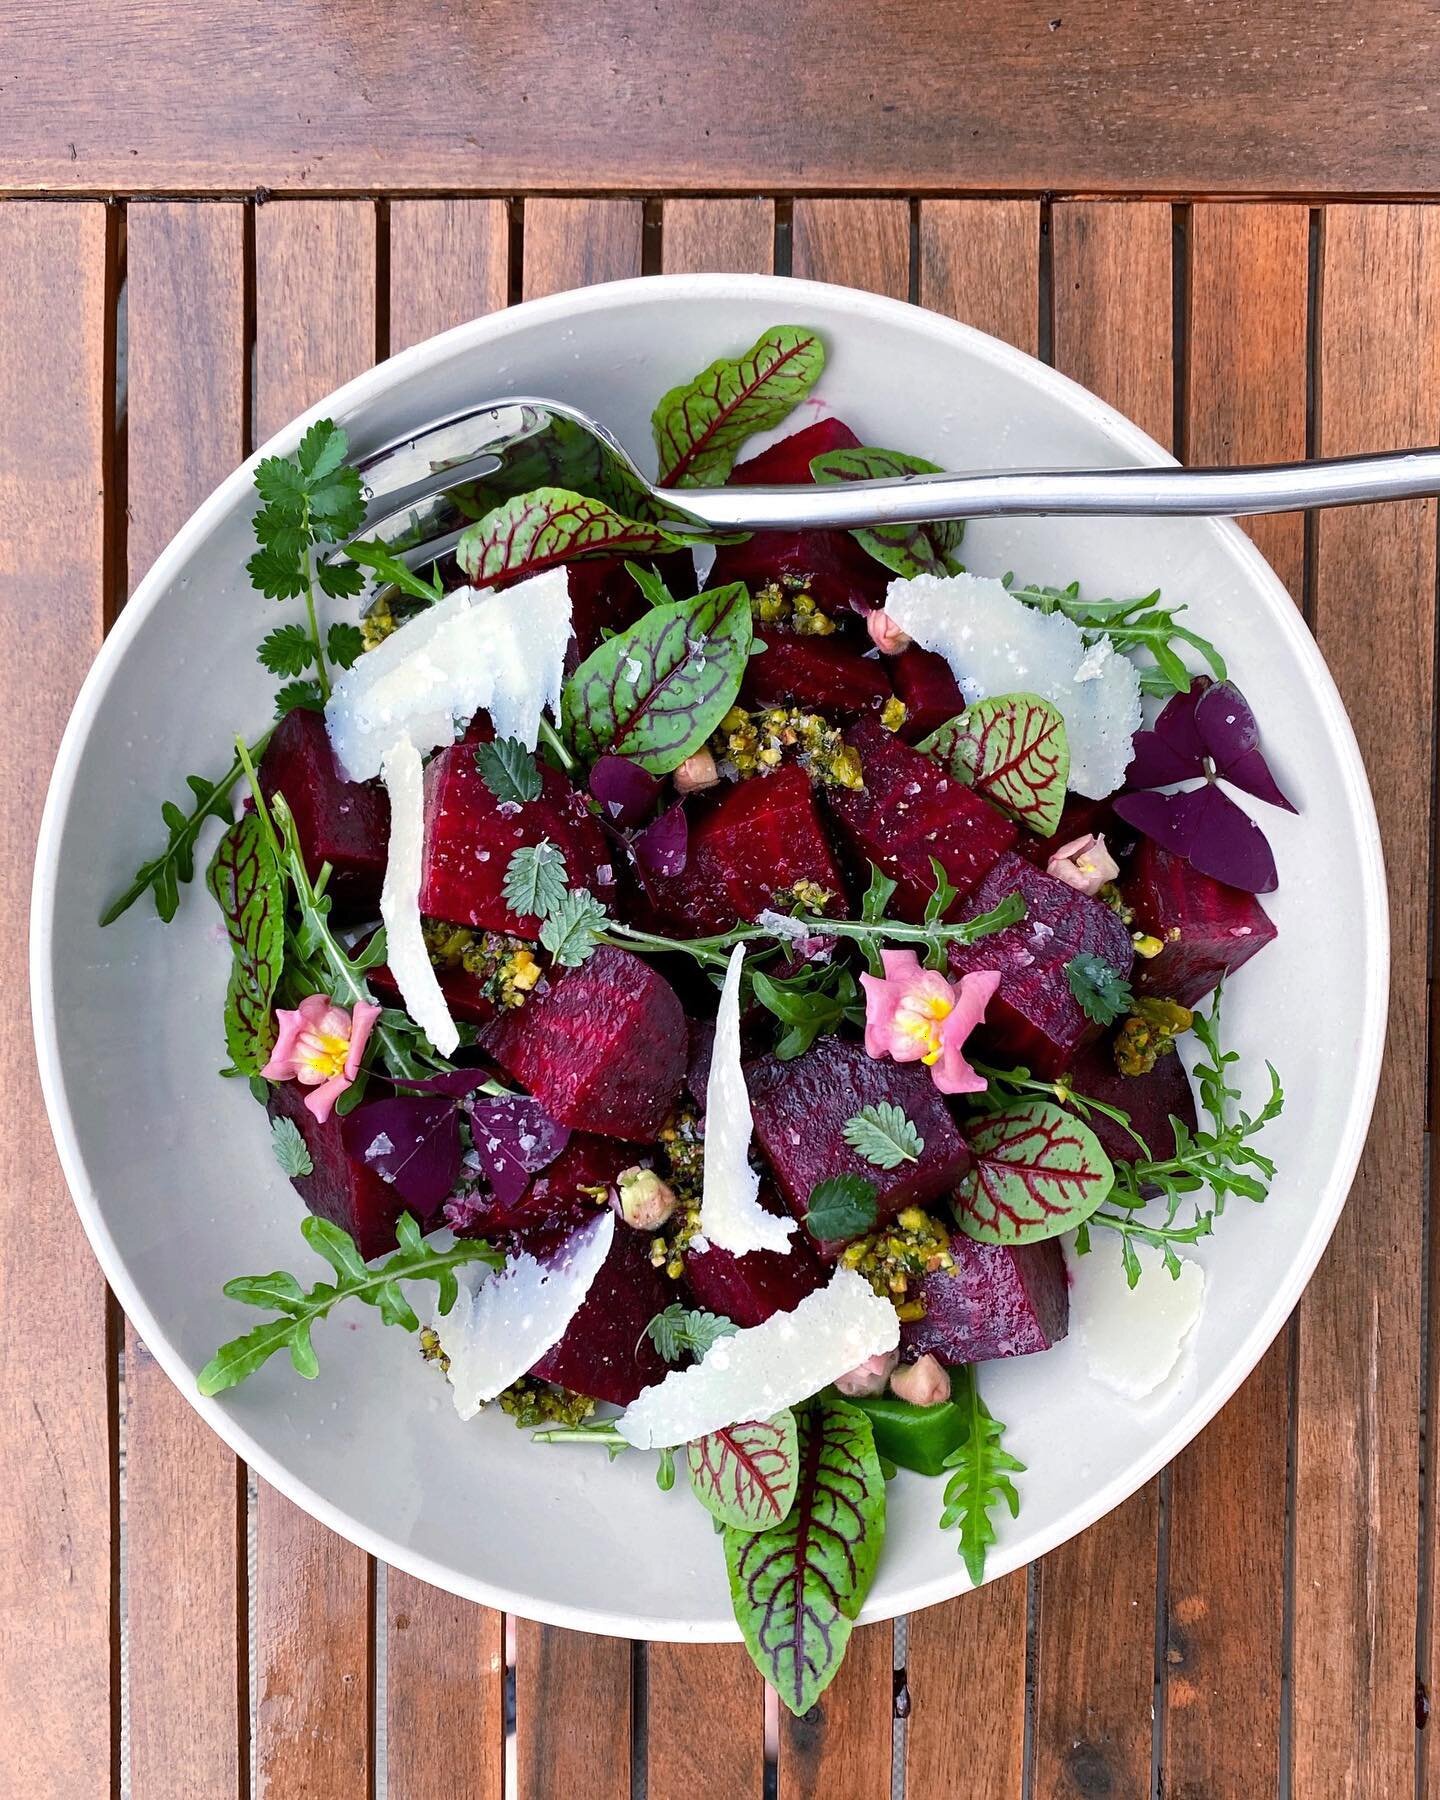 Easy to grow &ldquo;ingredients&rdquo; to transform your boring beet salad into a fancy pants one. ;) Swipe &mdash;&gt;&gt; sylvetta arugula (super pungent, so a little goes a long way), tart red veined sorrel, pink snapdragons, cucumber flavored sal